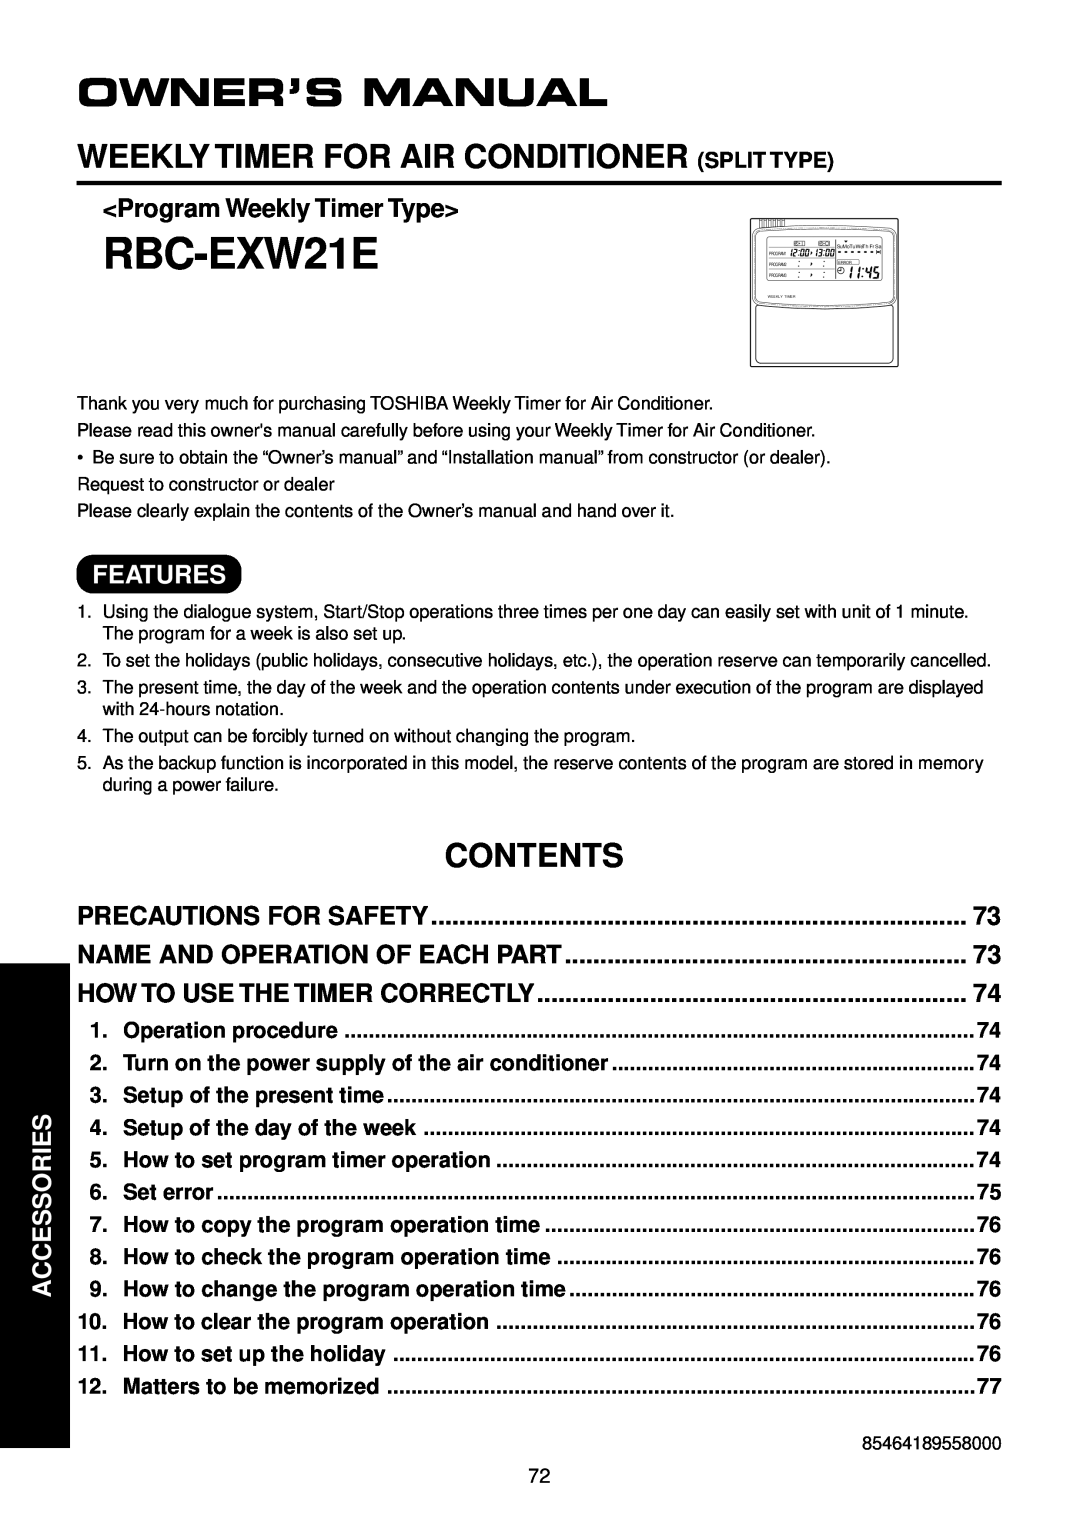 Toshiba R410A RBC-EXW21E, Owner’S Manual, Weekly Timer For Air Conditioner Split Type, Features, Contents, Accessories 